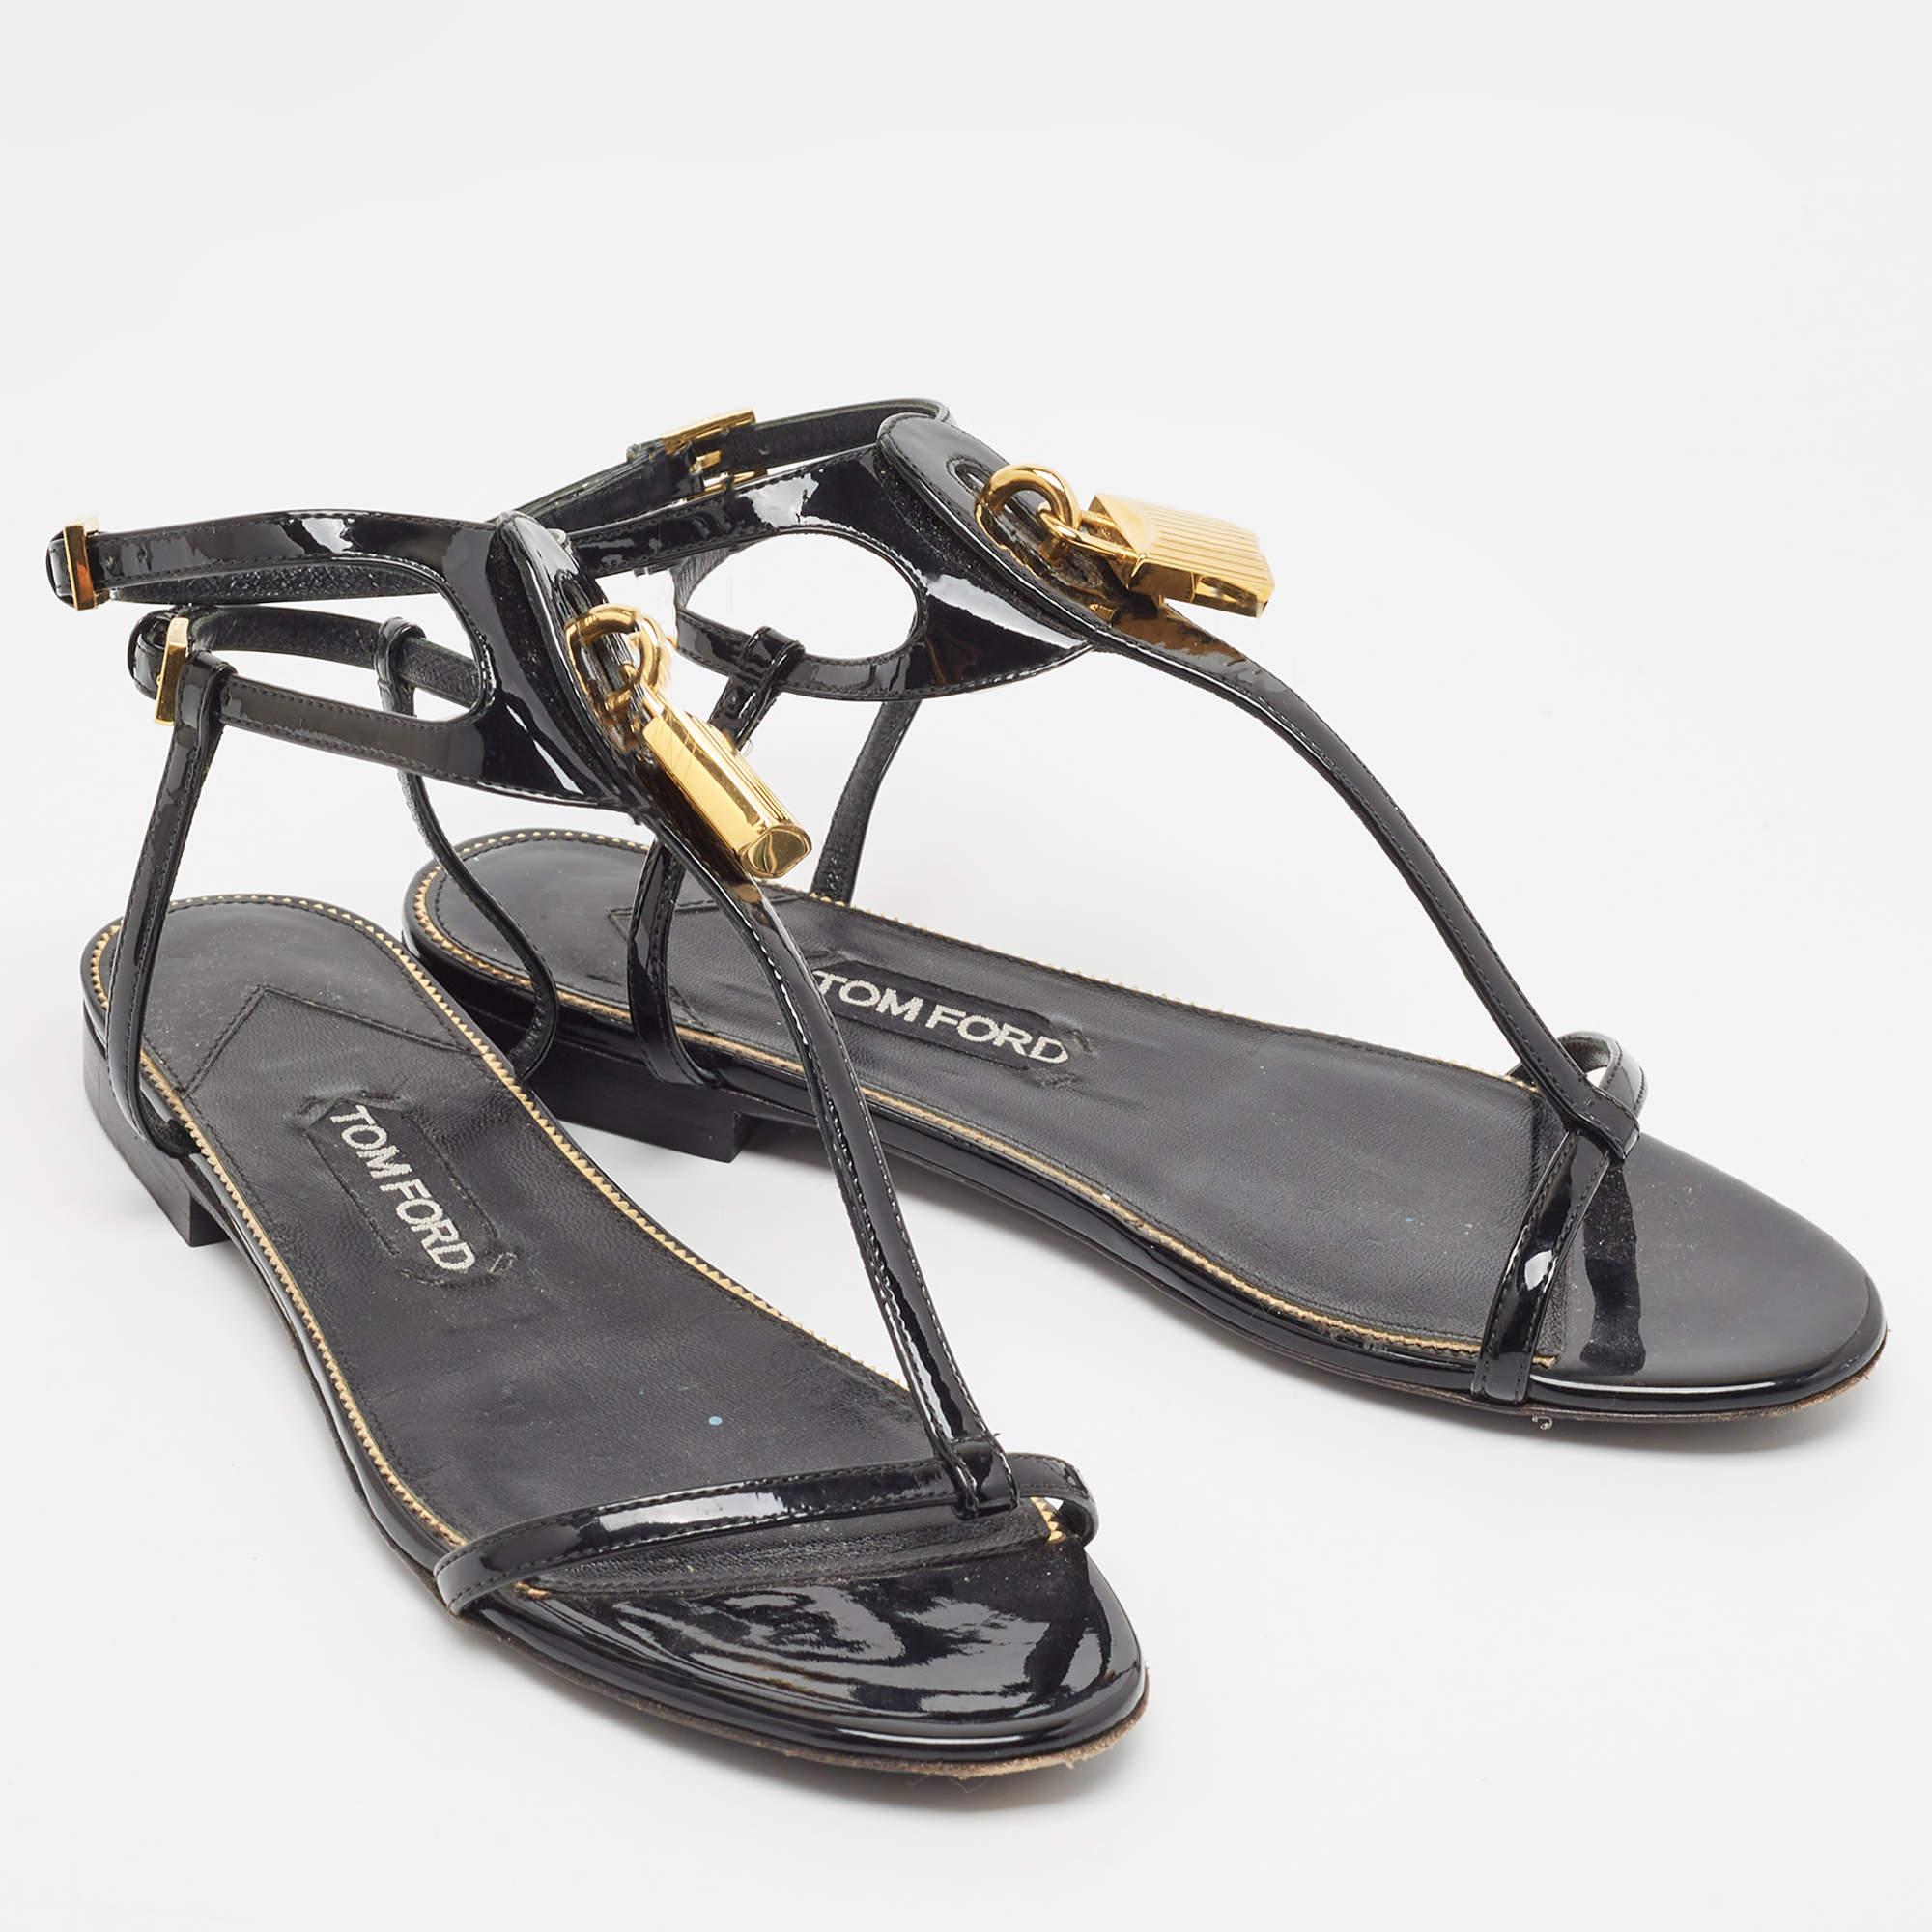 Simplicity is really glorious and these flats from Tom Ford are a testament to that belief. Beautifully crafted from patent leather, the flats flaunt open toes, padlock details and buckle ankle straps. Team these with a pretty sundress to make an